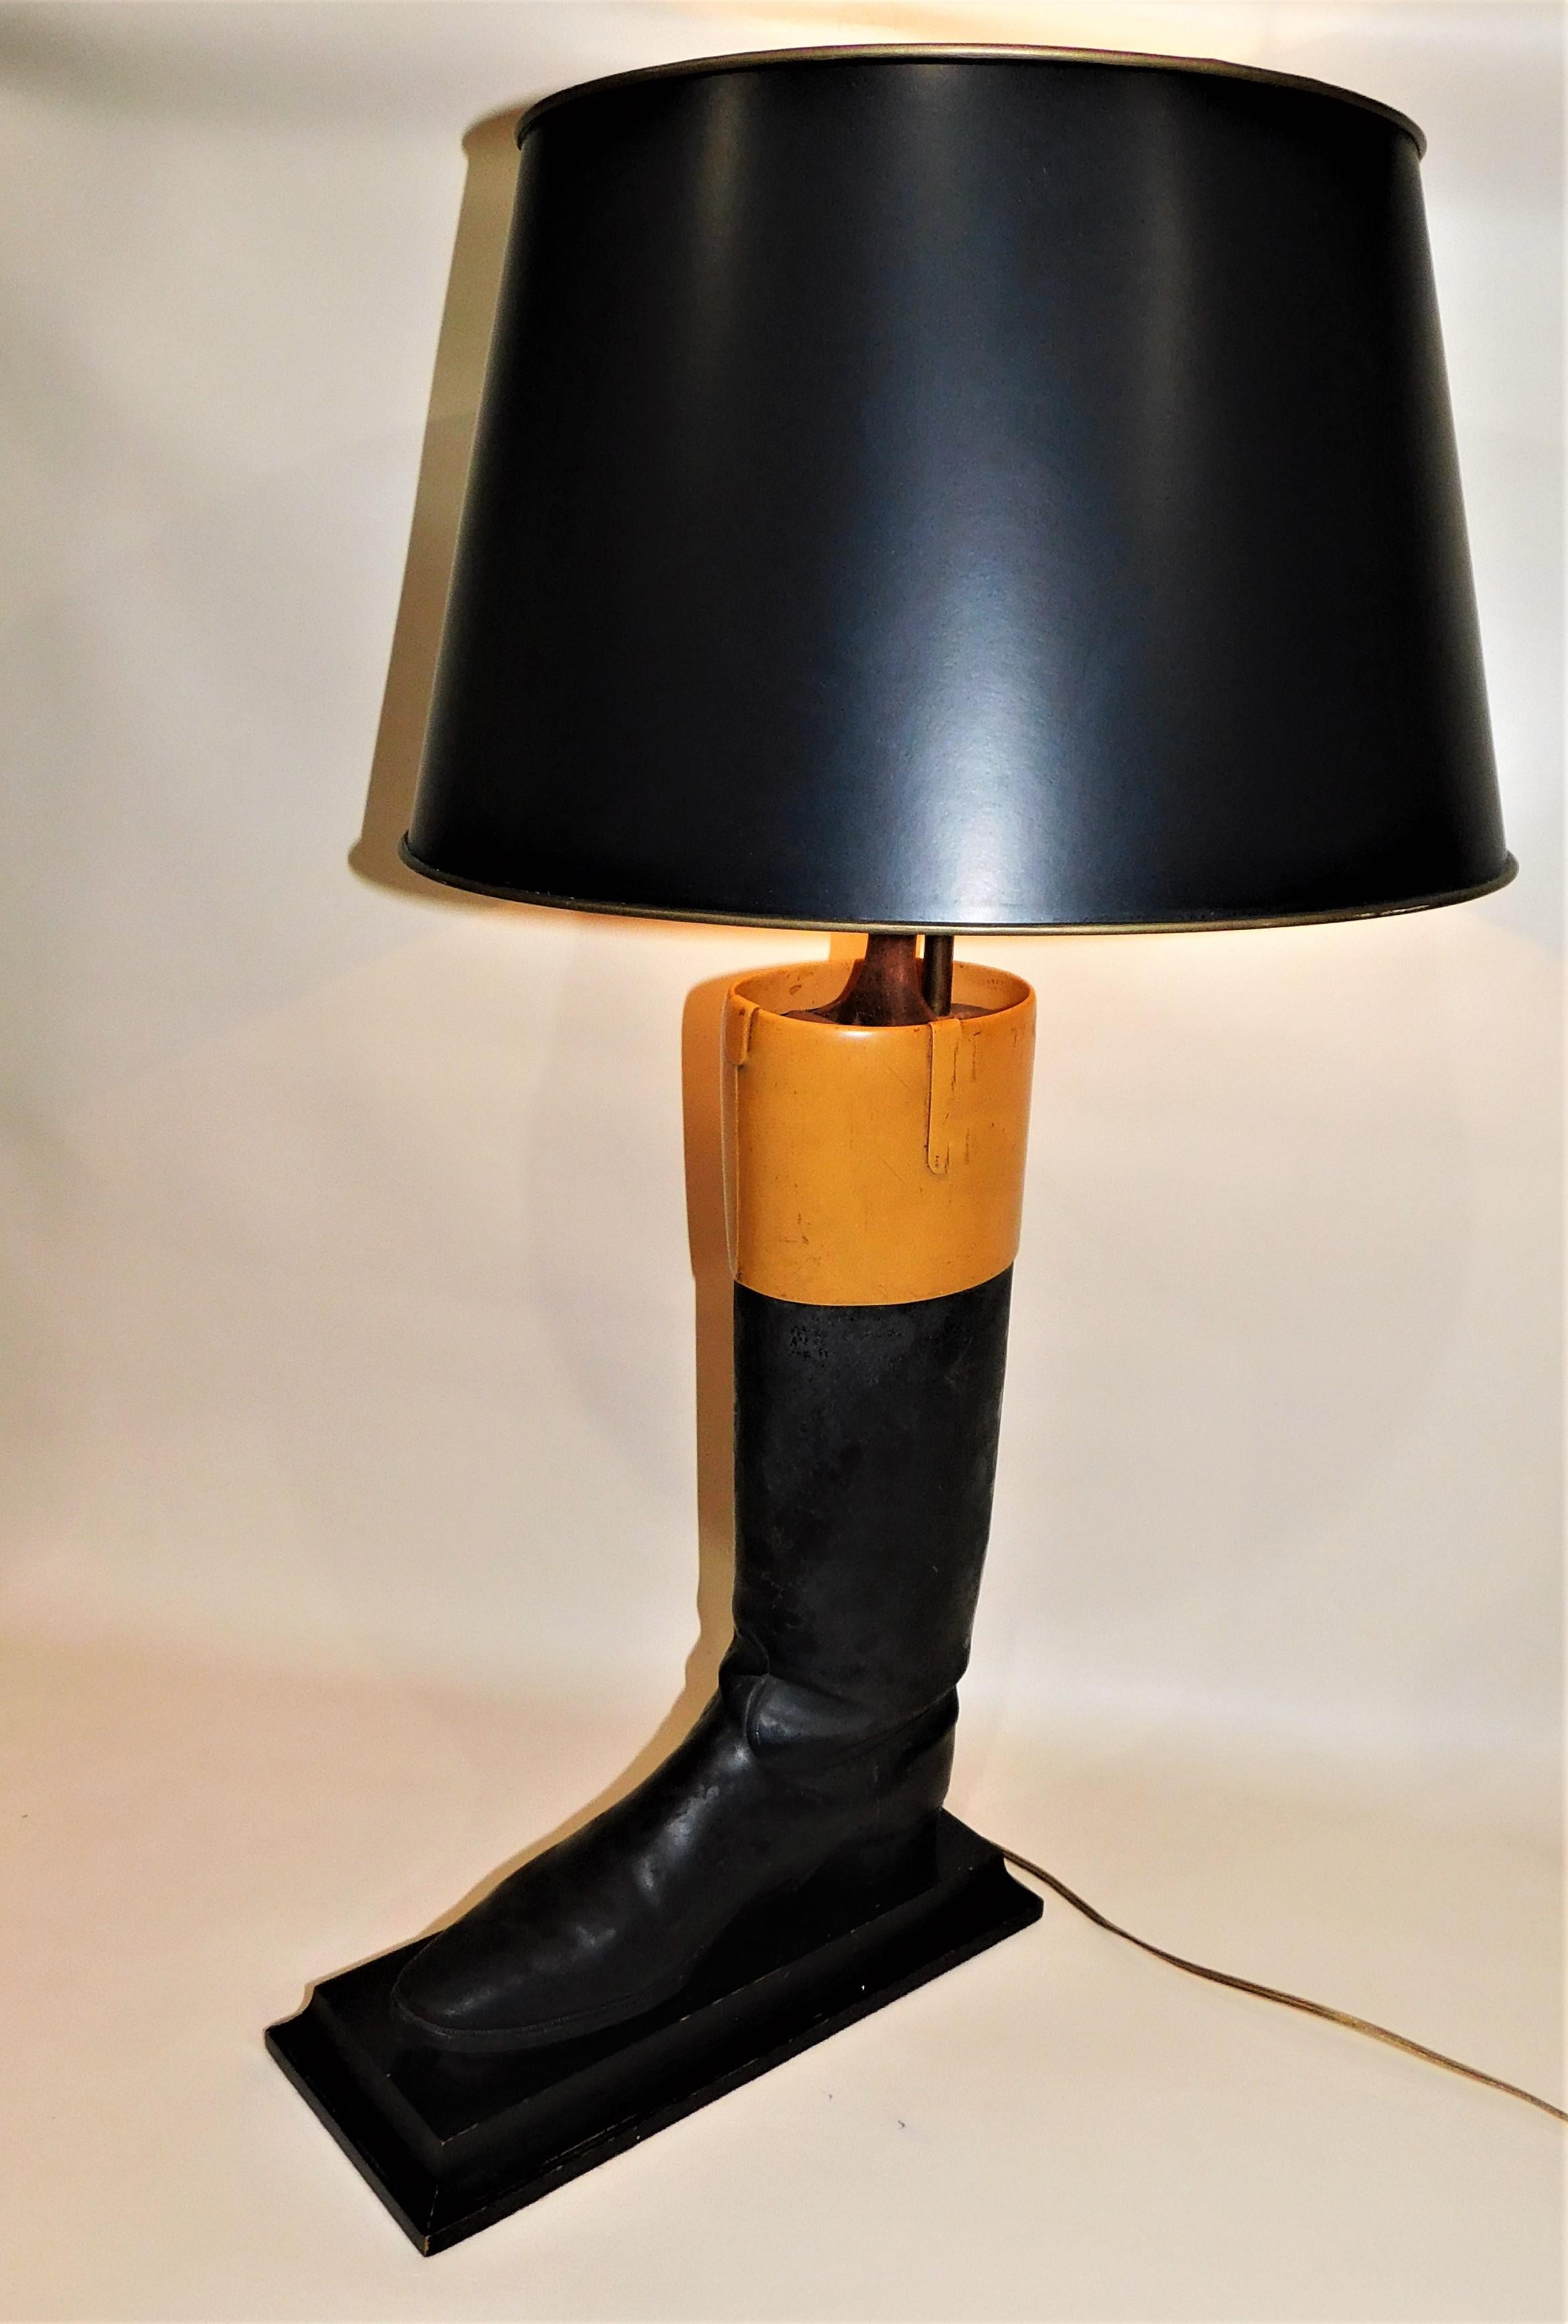 Vintage pair of unique leather hunting or riding boot lights and there original boot trees/molds mounted on a wood base and wired as table lamps. Both in working condition, two black shades and finials included. The top of the boot is a harder